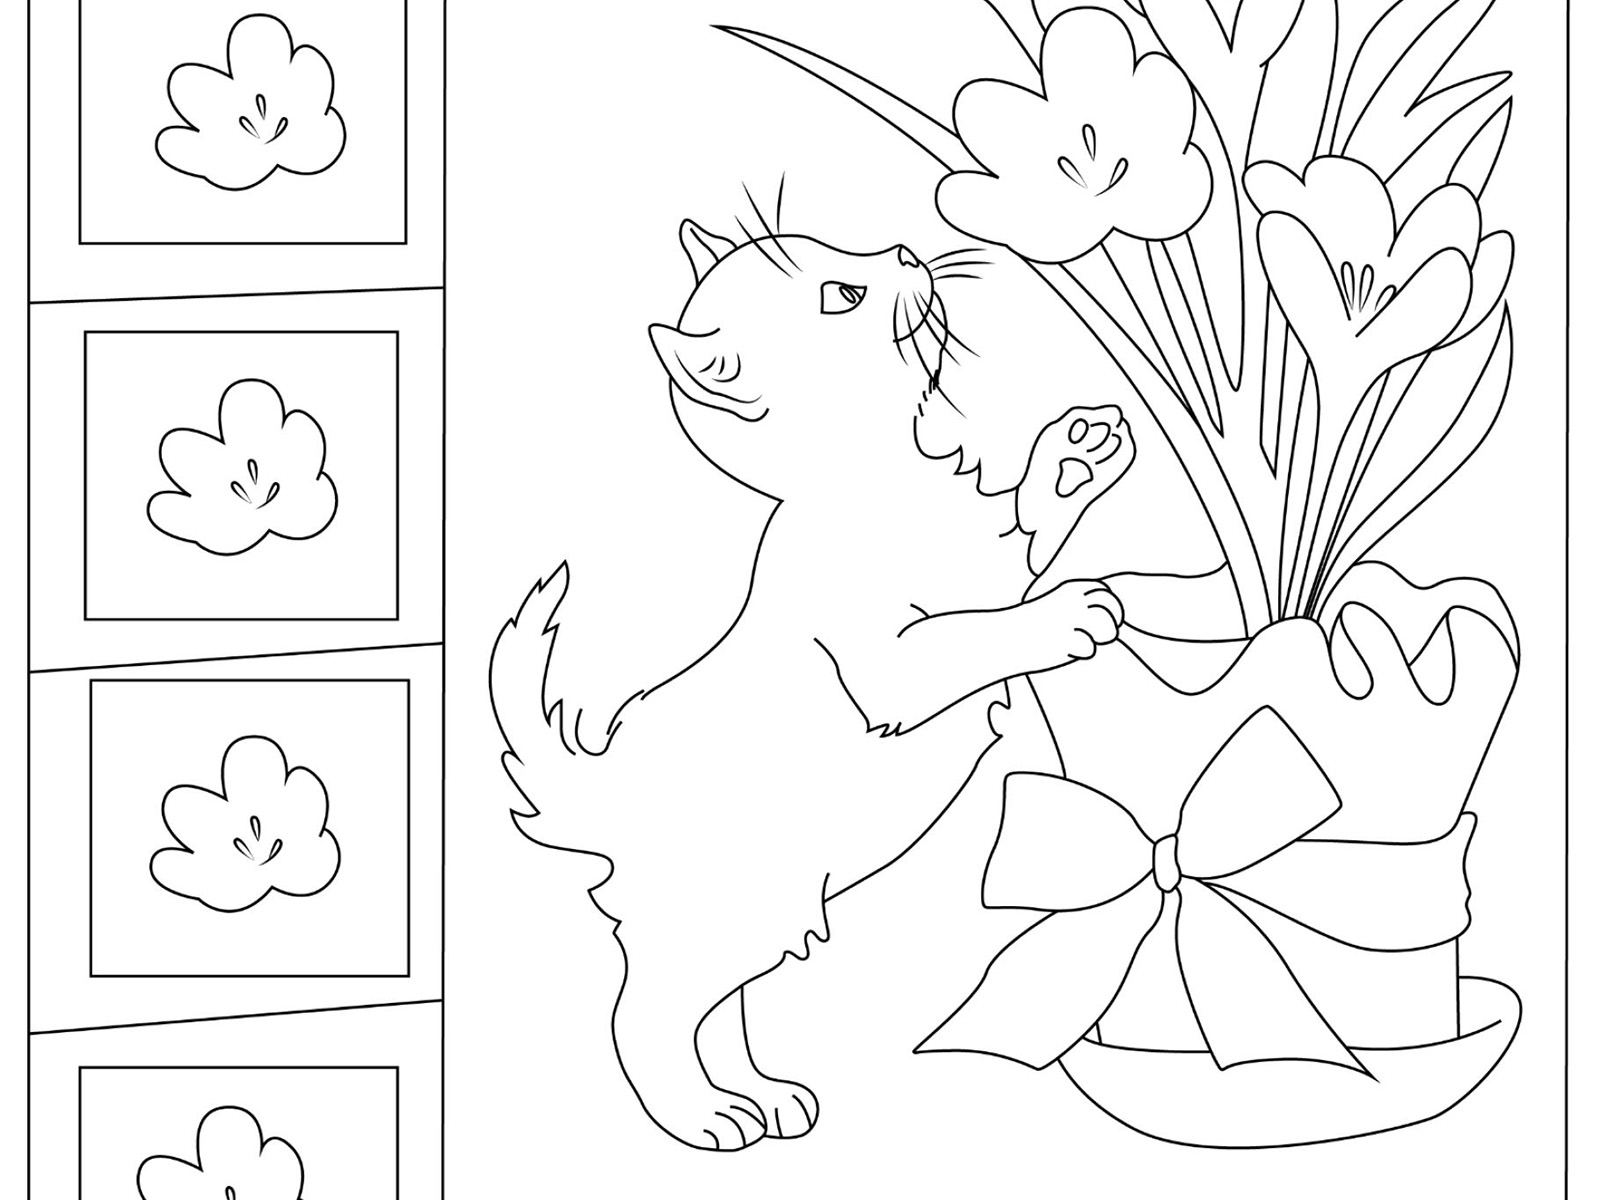 Cat and flower coloring pages